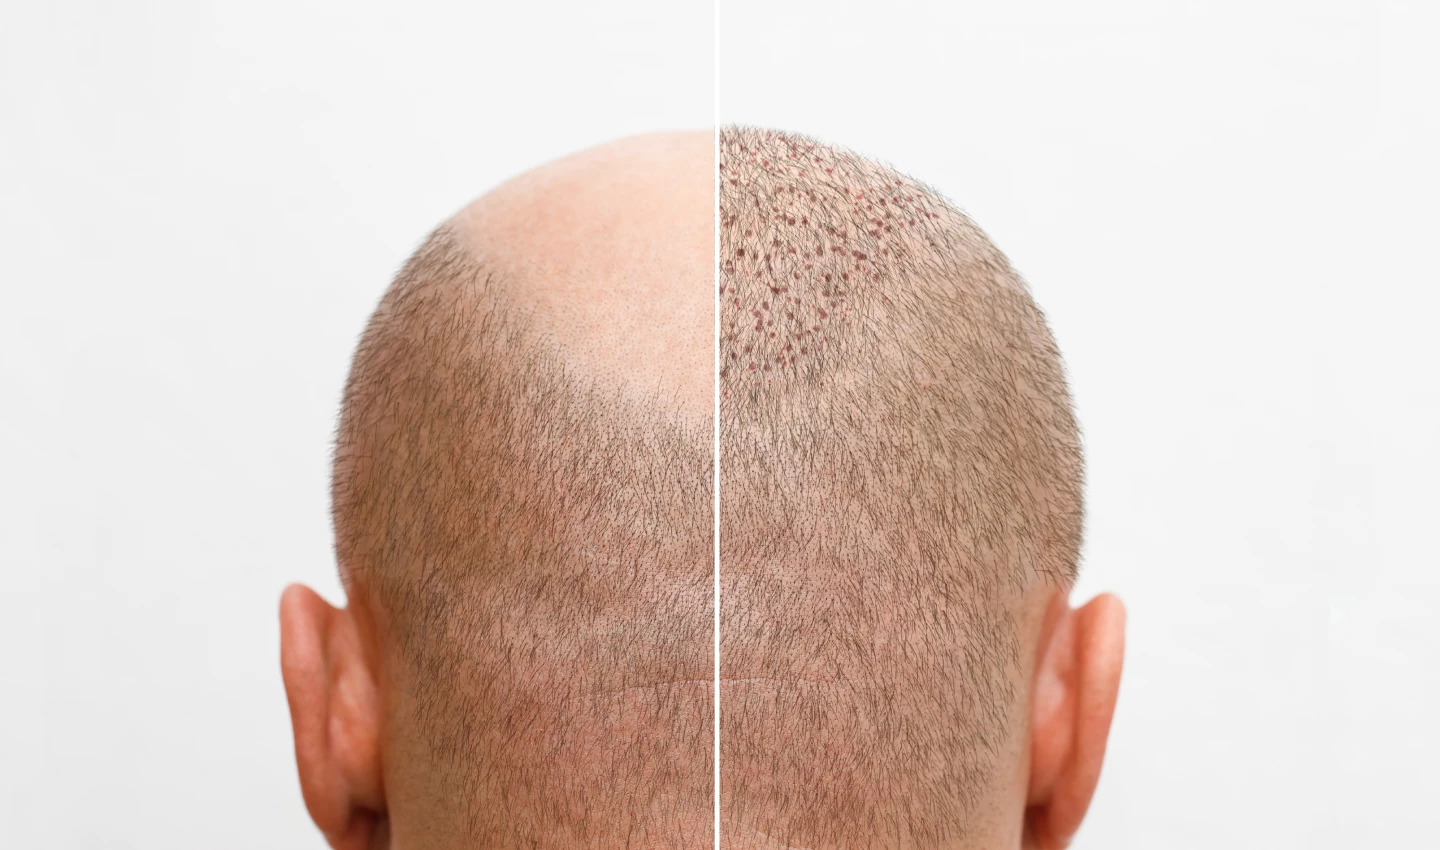 Before and after photo of a patient who underwent hair transplantation, showcasing their hair loss before and full head of hair after the procedure.